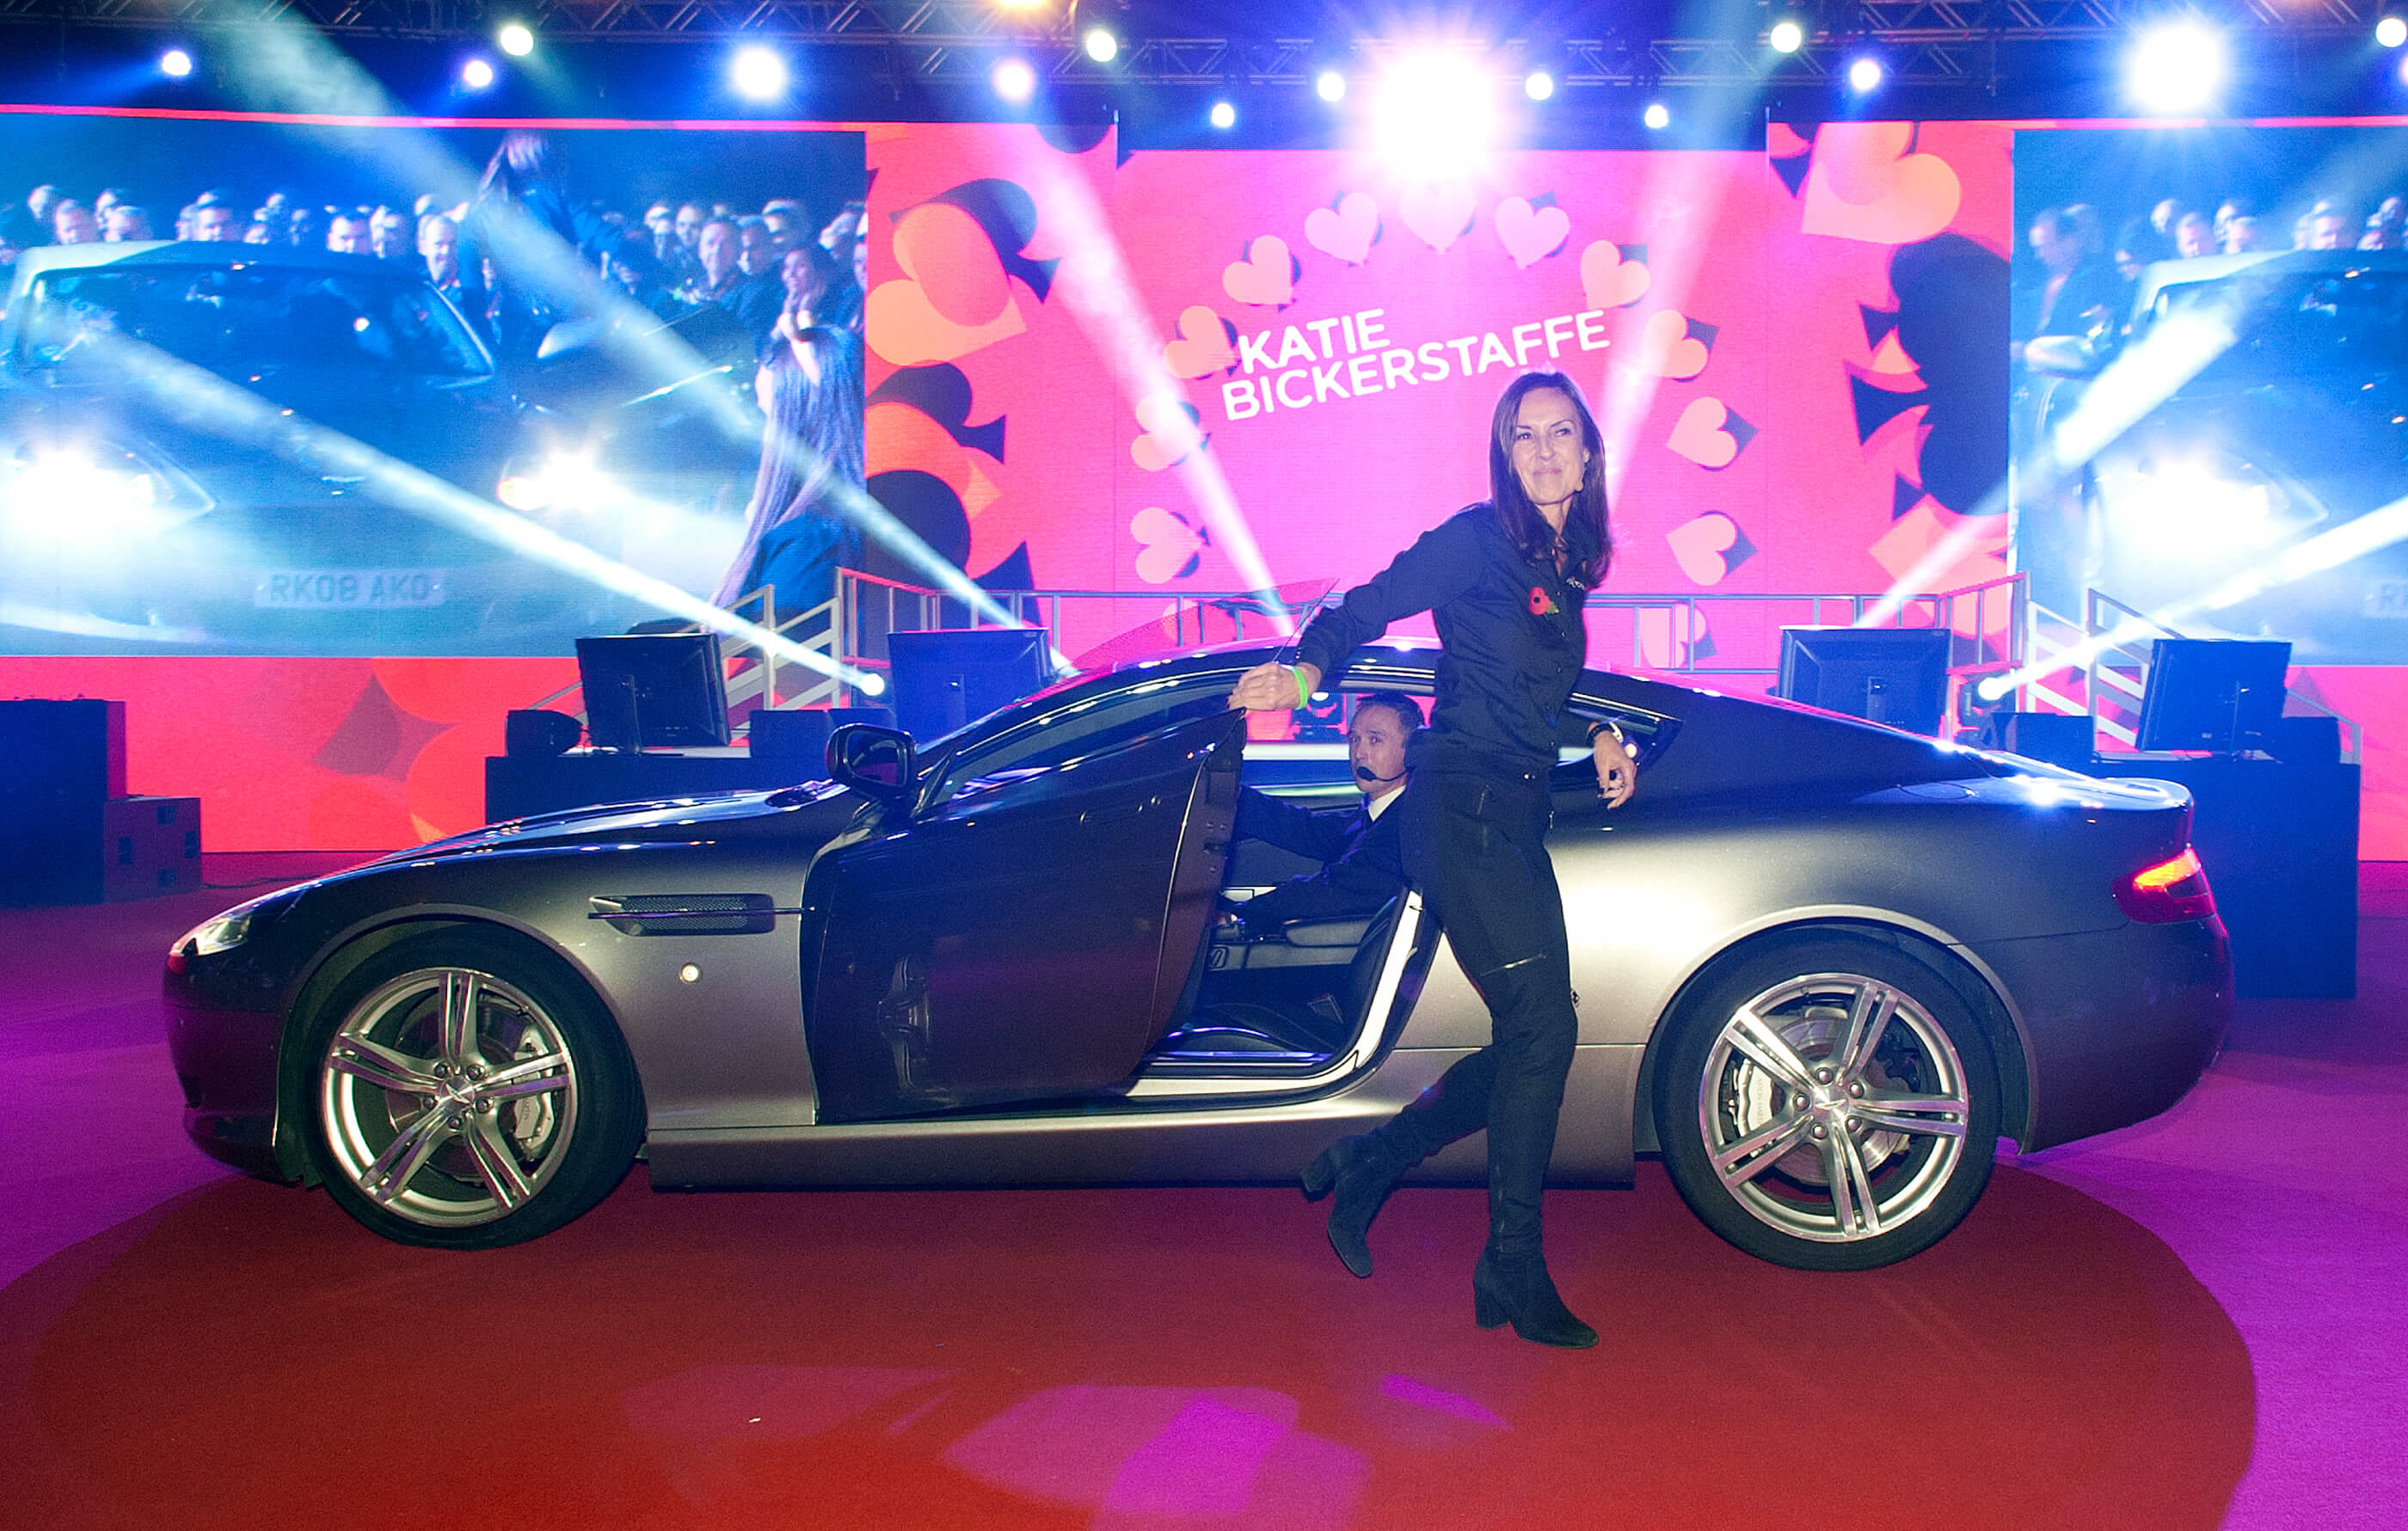 Katie Bickerstaffe – Chief Executive of Dixons UK and Ireland – steps out of a grey Aston Martin DB7 in front of the main stage